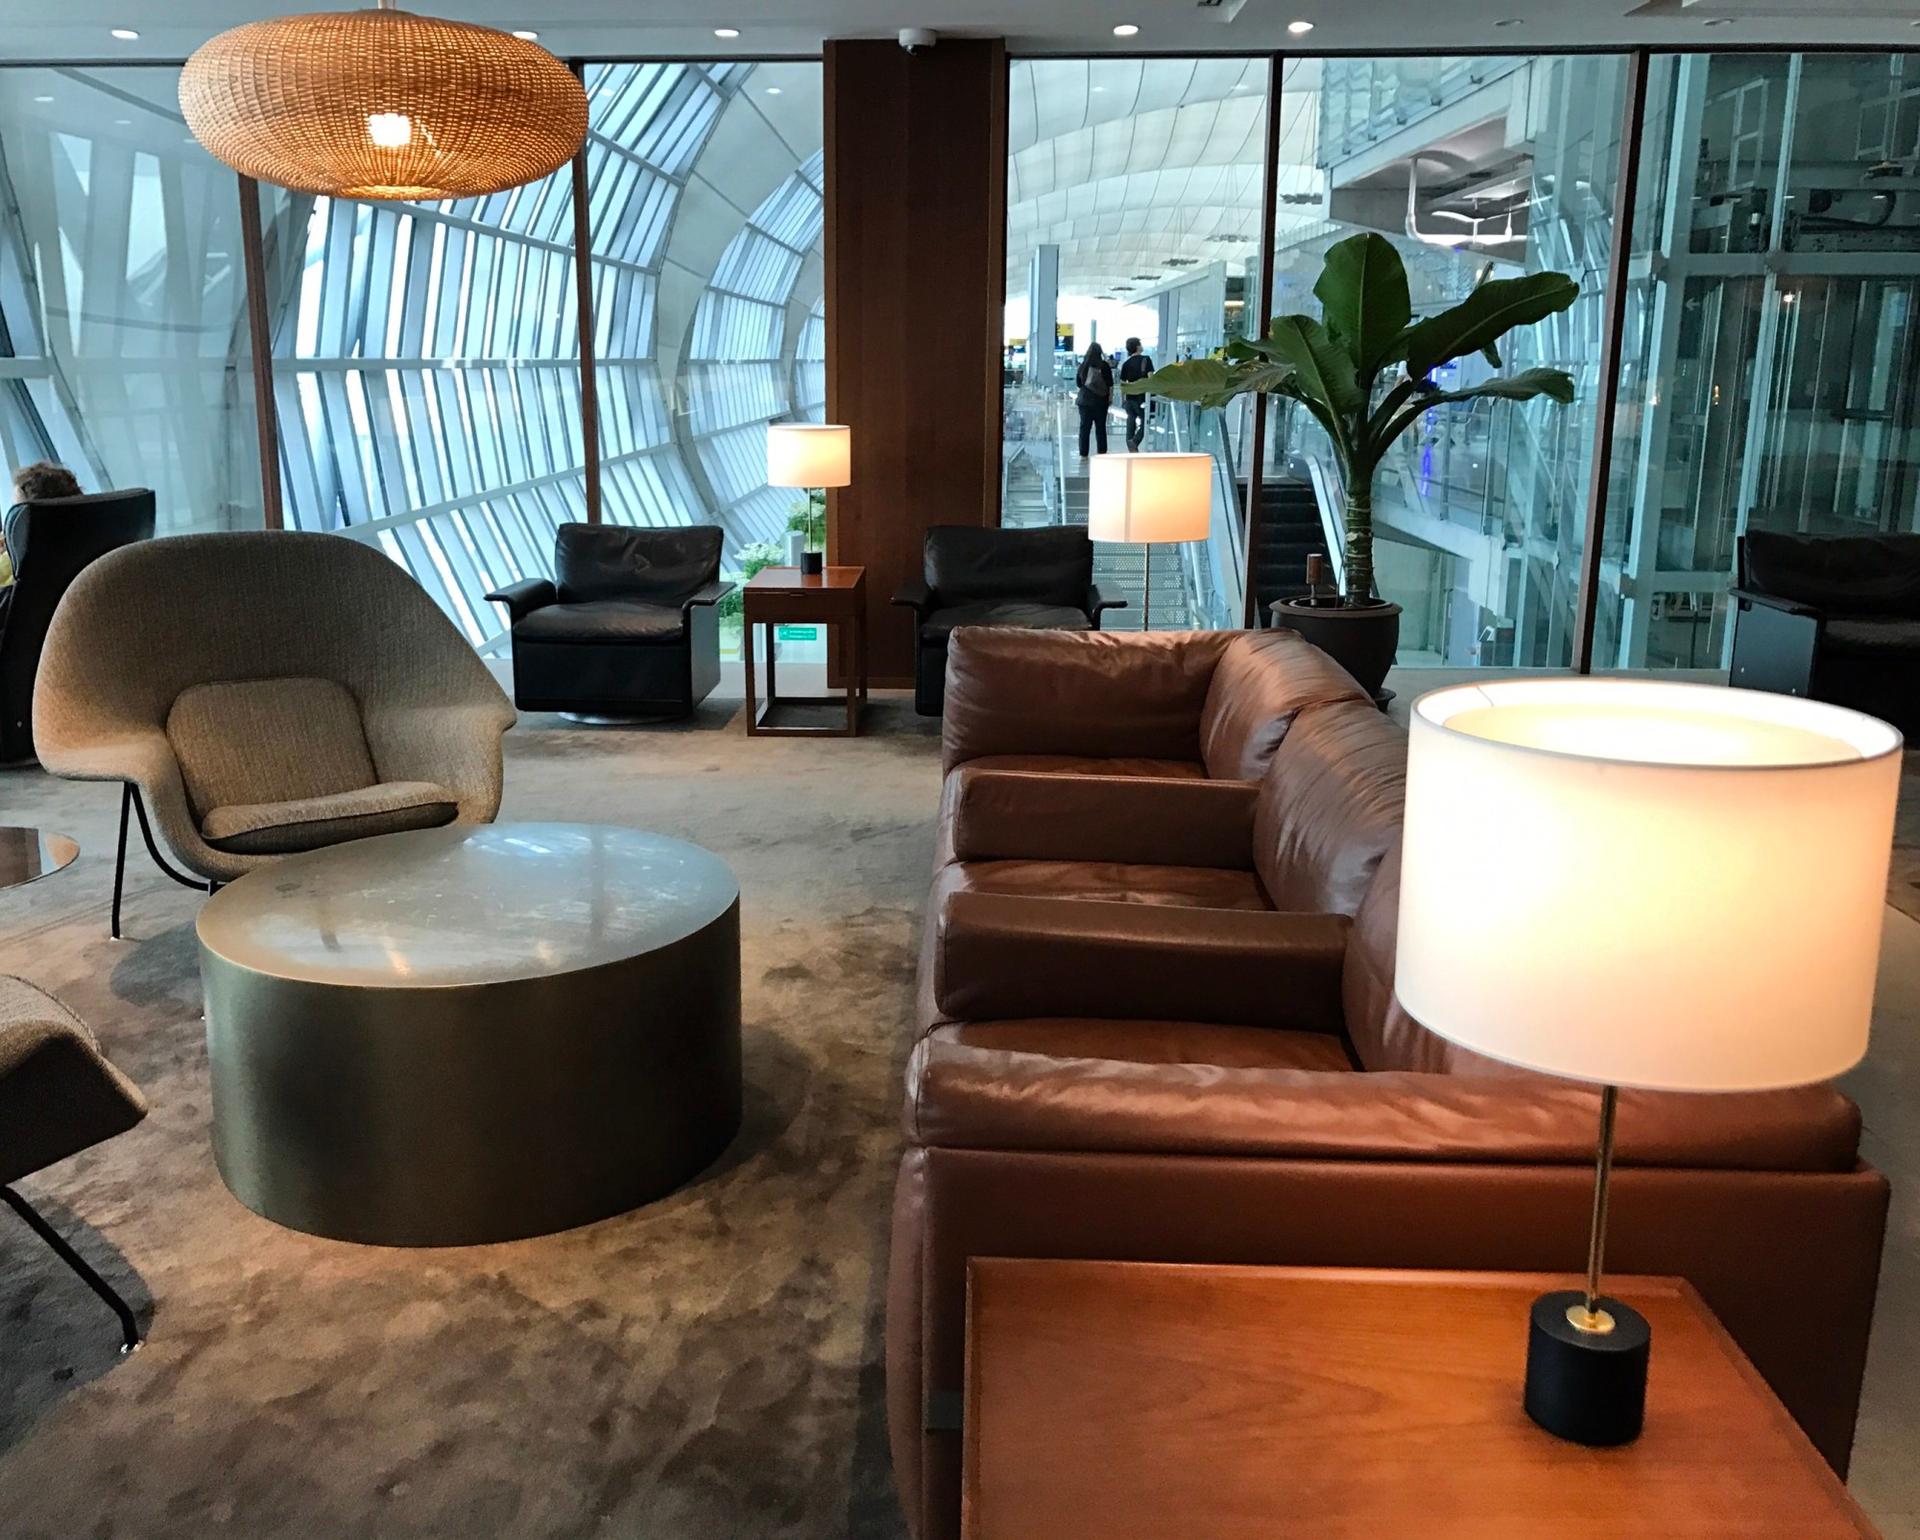 Cathay Pacific First and Business Class Lounge image 45 of 69